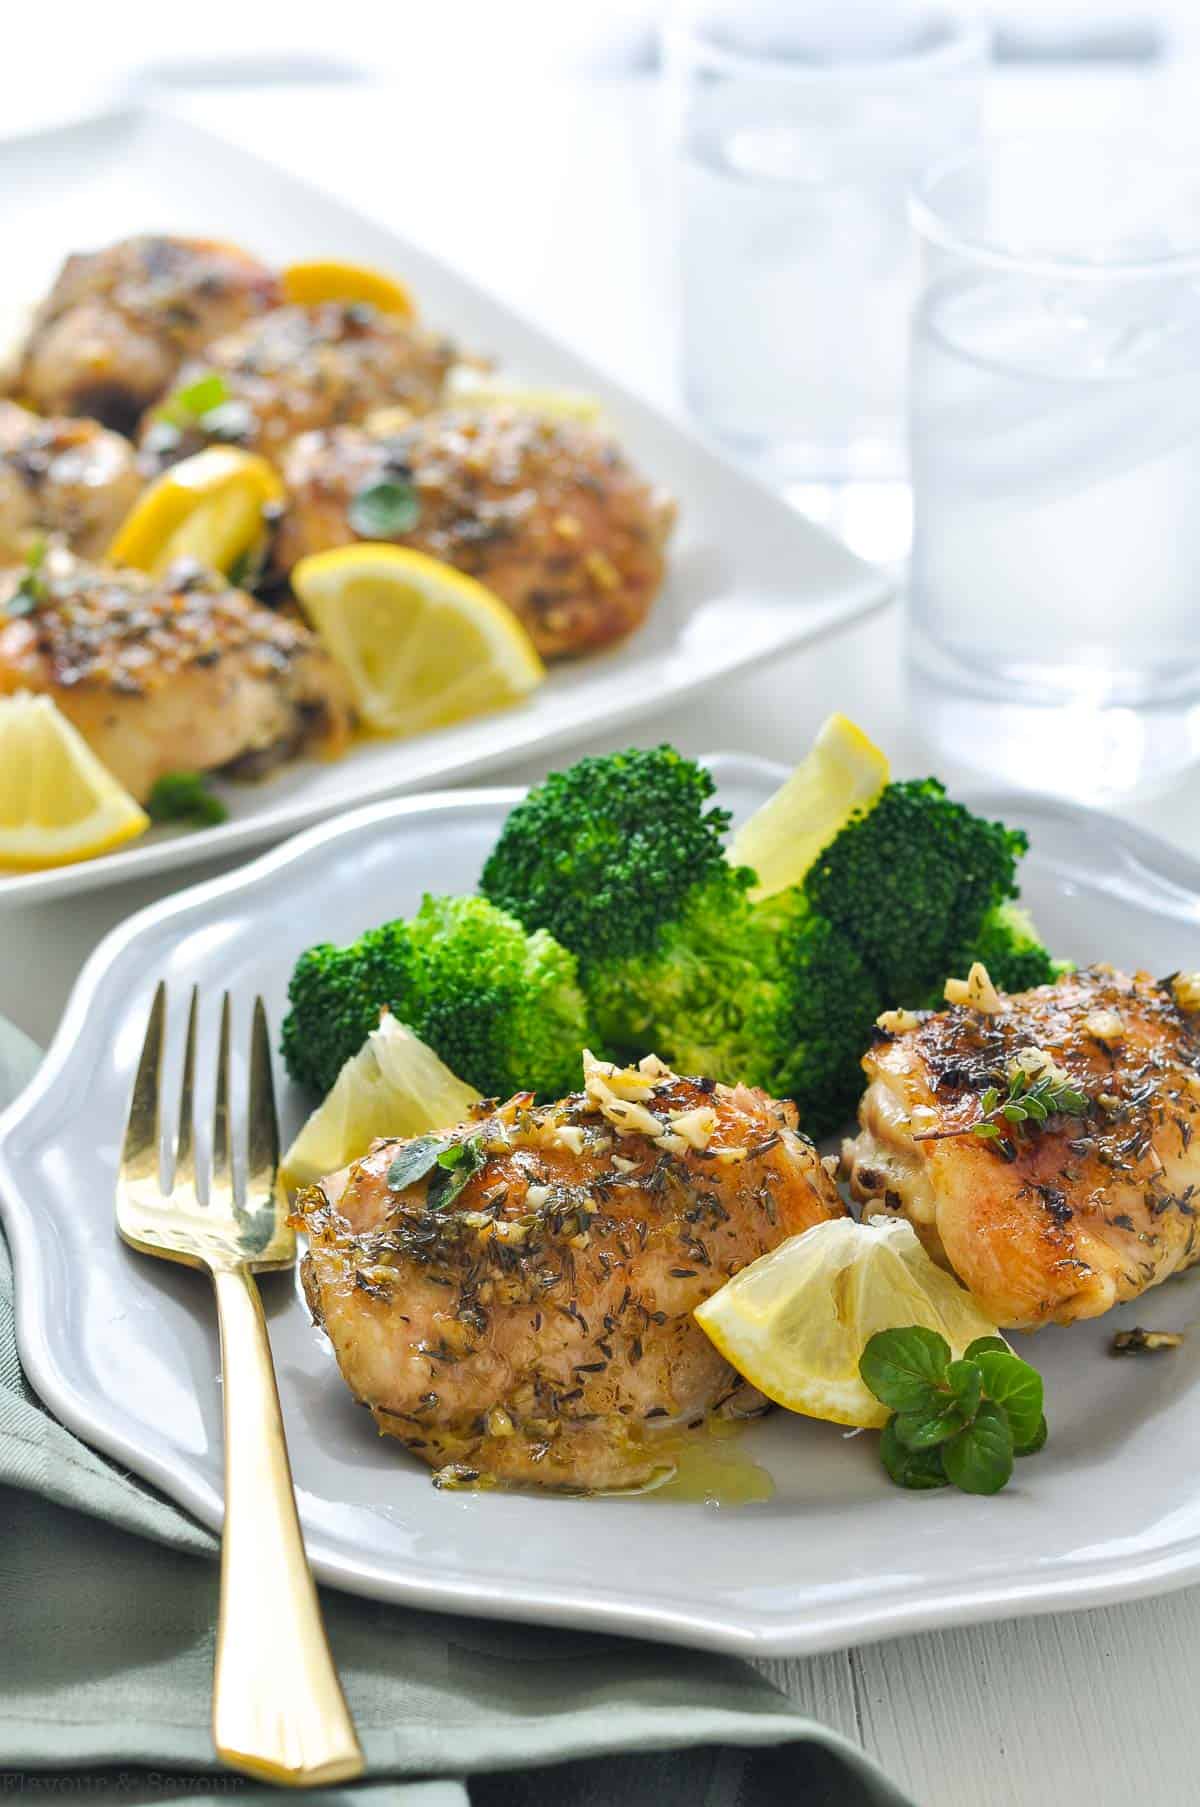 Easy Baked Lemon Chicken on a plate with broccoli and lemon wedges